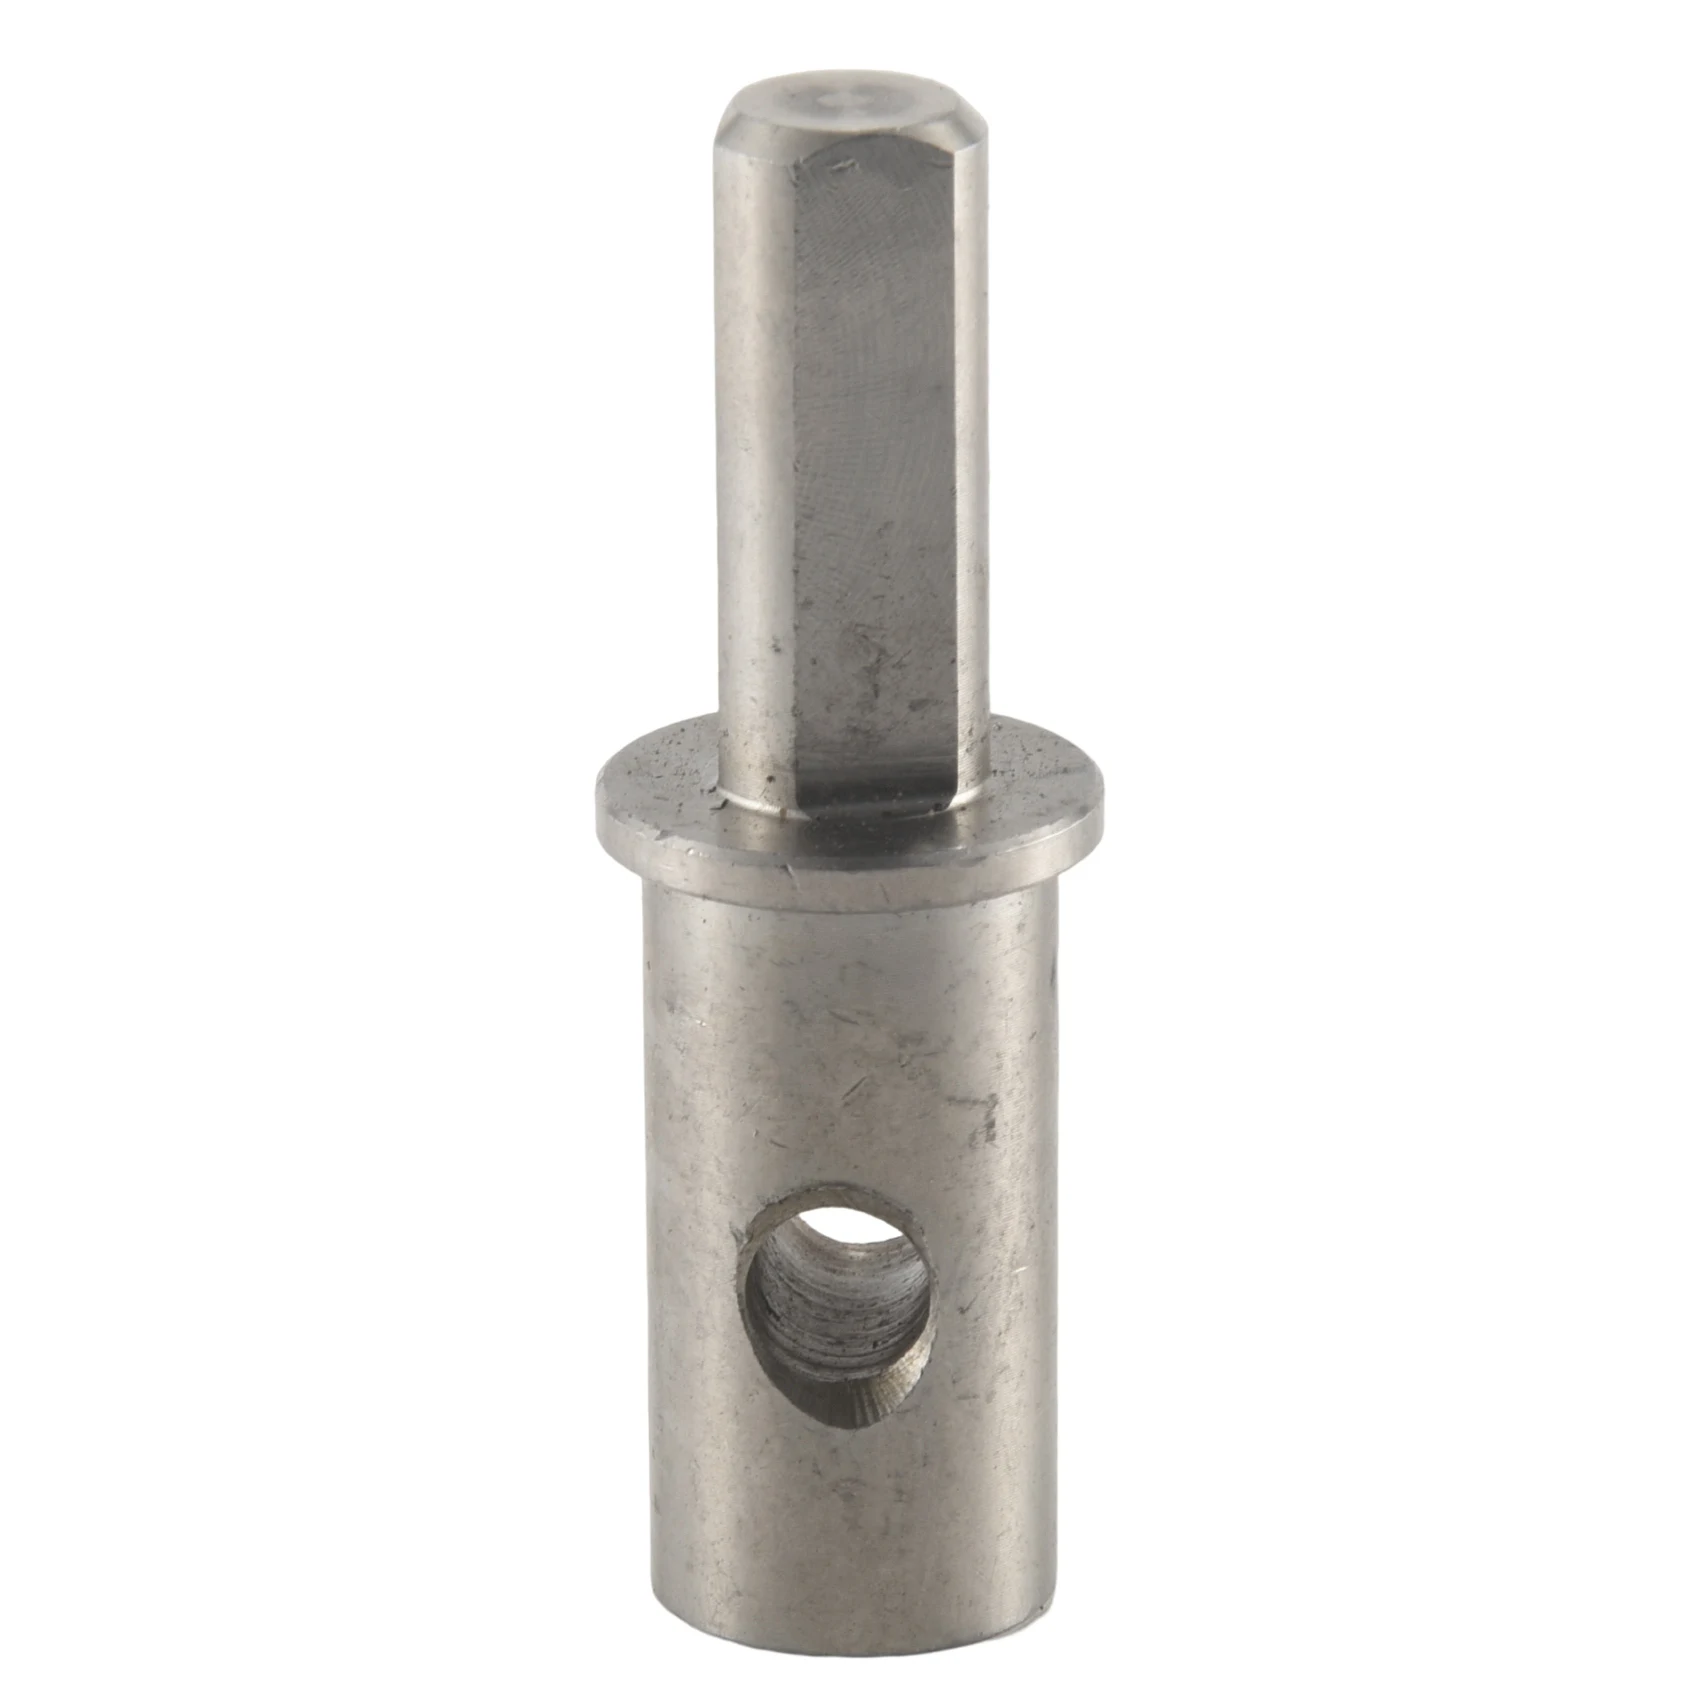 

Ice Auger Drill Adapter Fits Drill Cinchhuck: 1/2 Plus and 1/4 inch Hole for 1/4 inch-20 Wing Bolts & Locking Screws